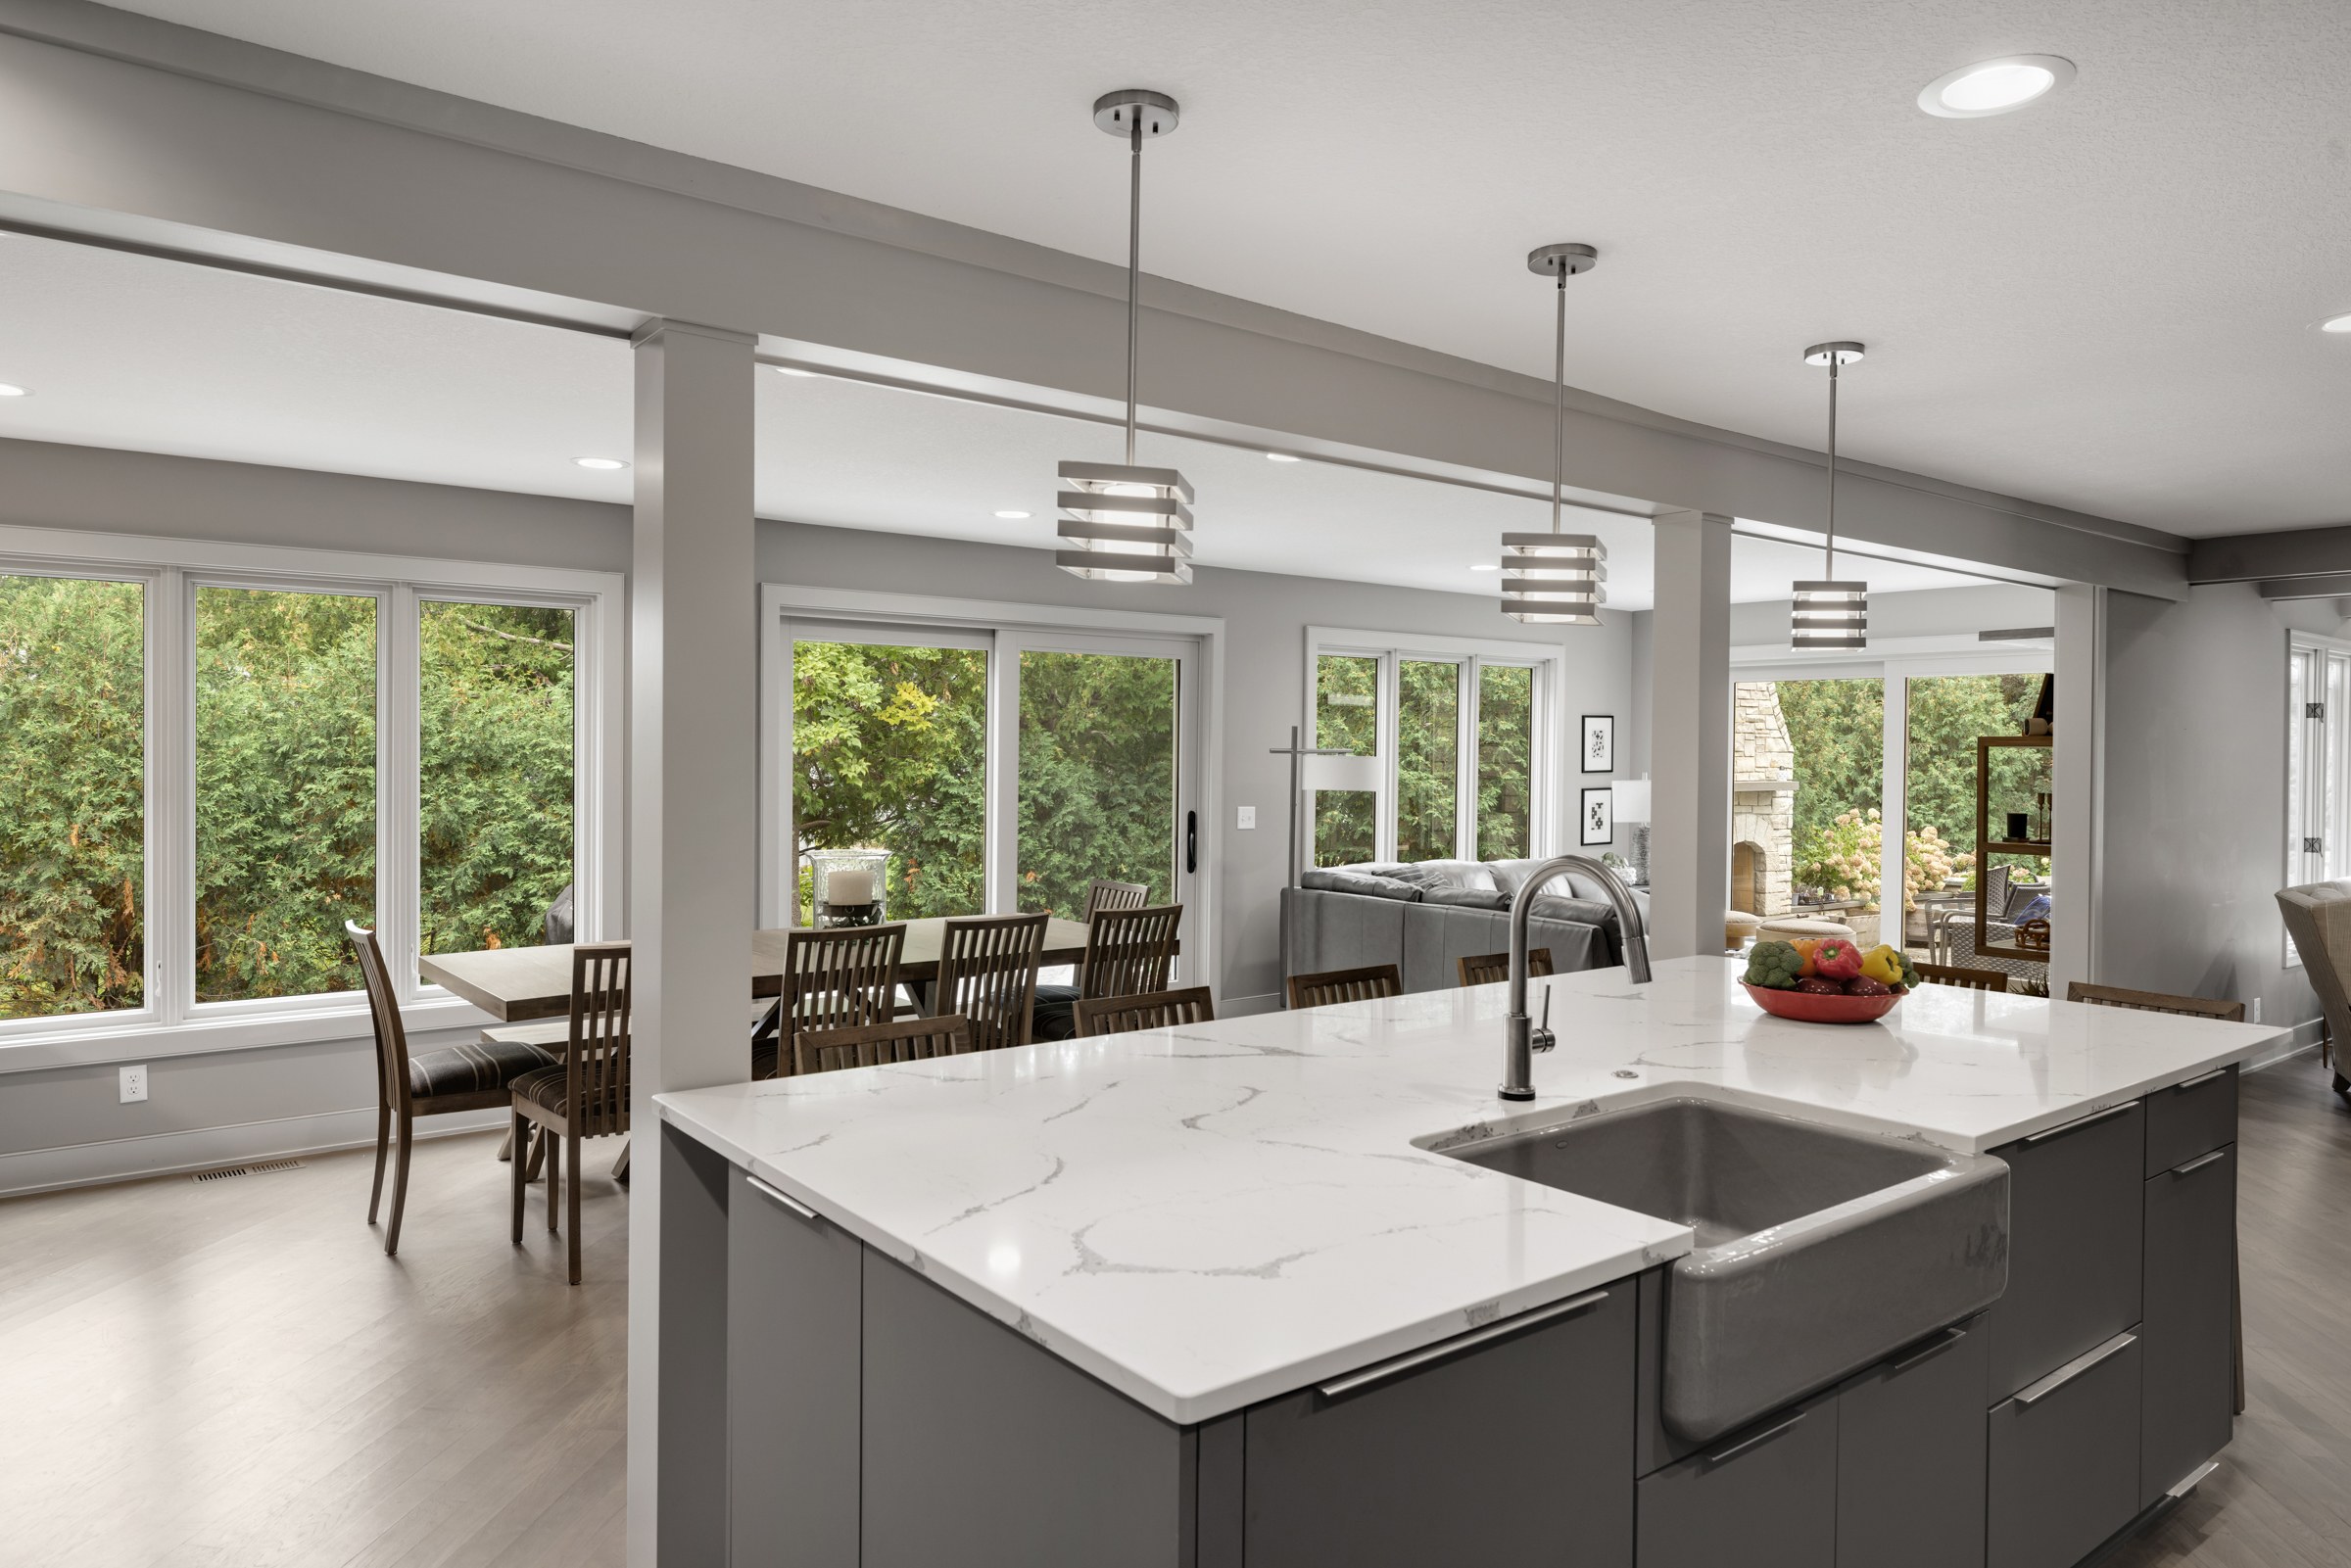 Kitchen addition with large windows and island that seats 6 people